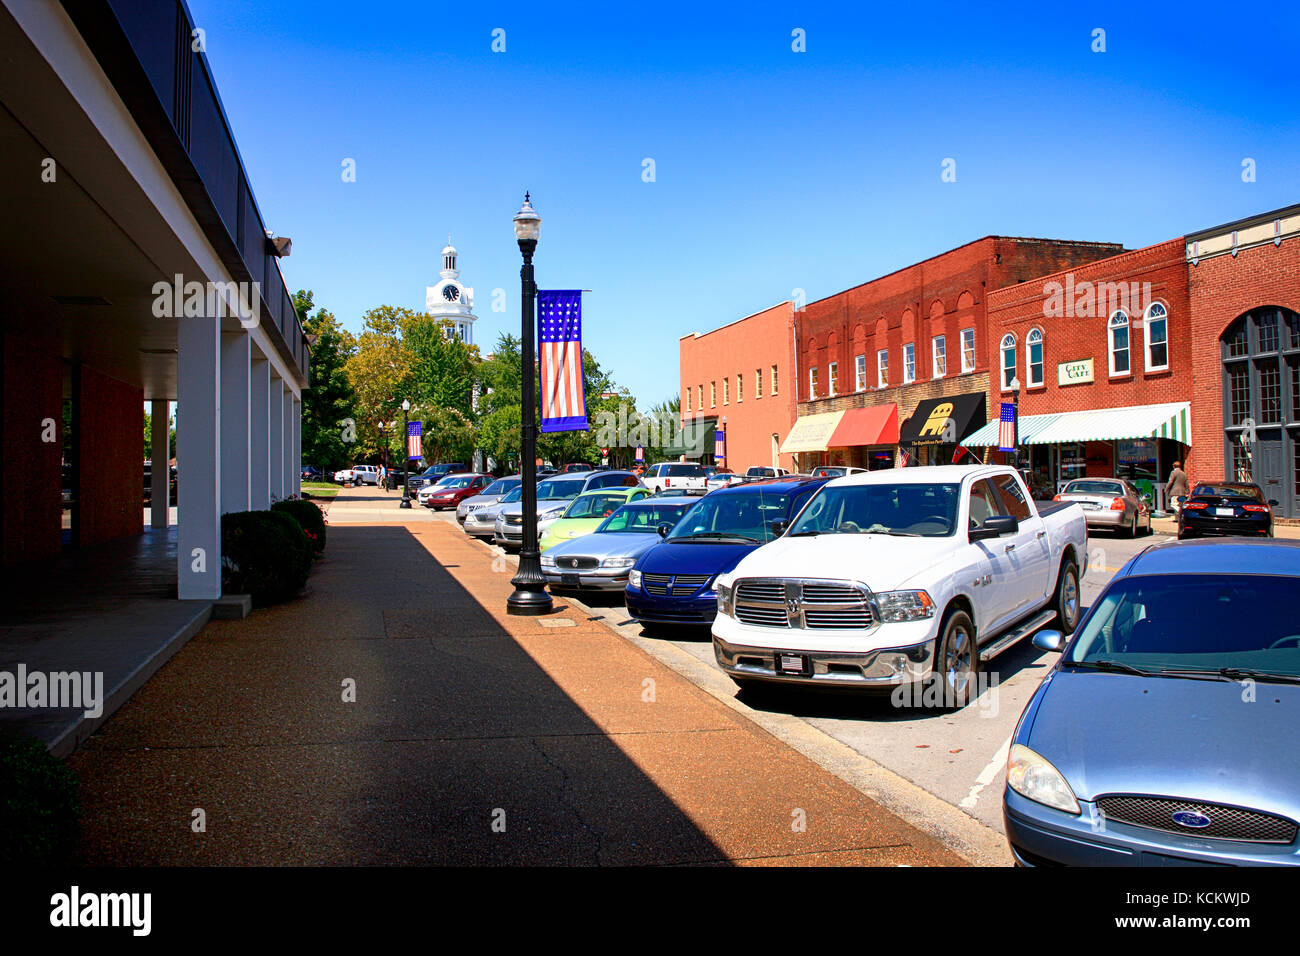 Looking at the clock tower atop of the Courthouse in downtown Murfreesboro TN, USA Stock Photo